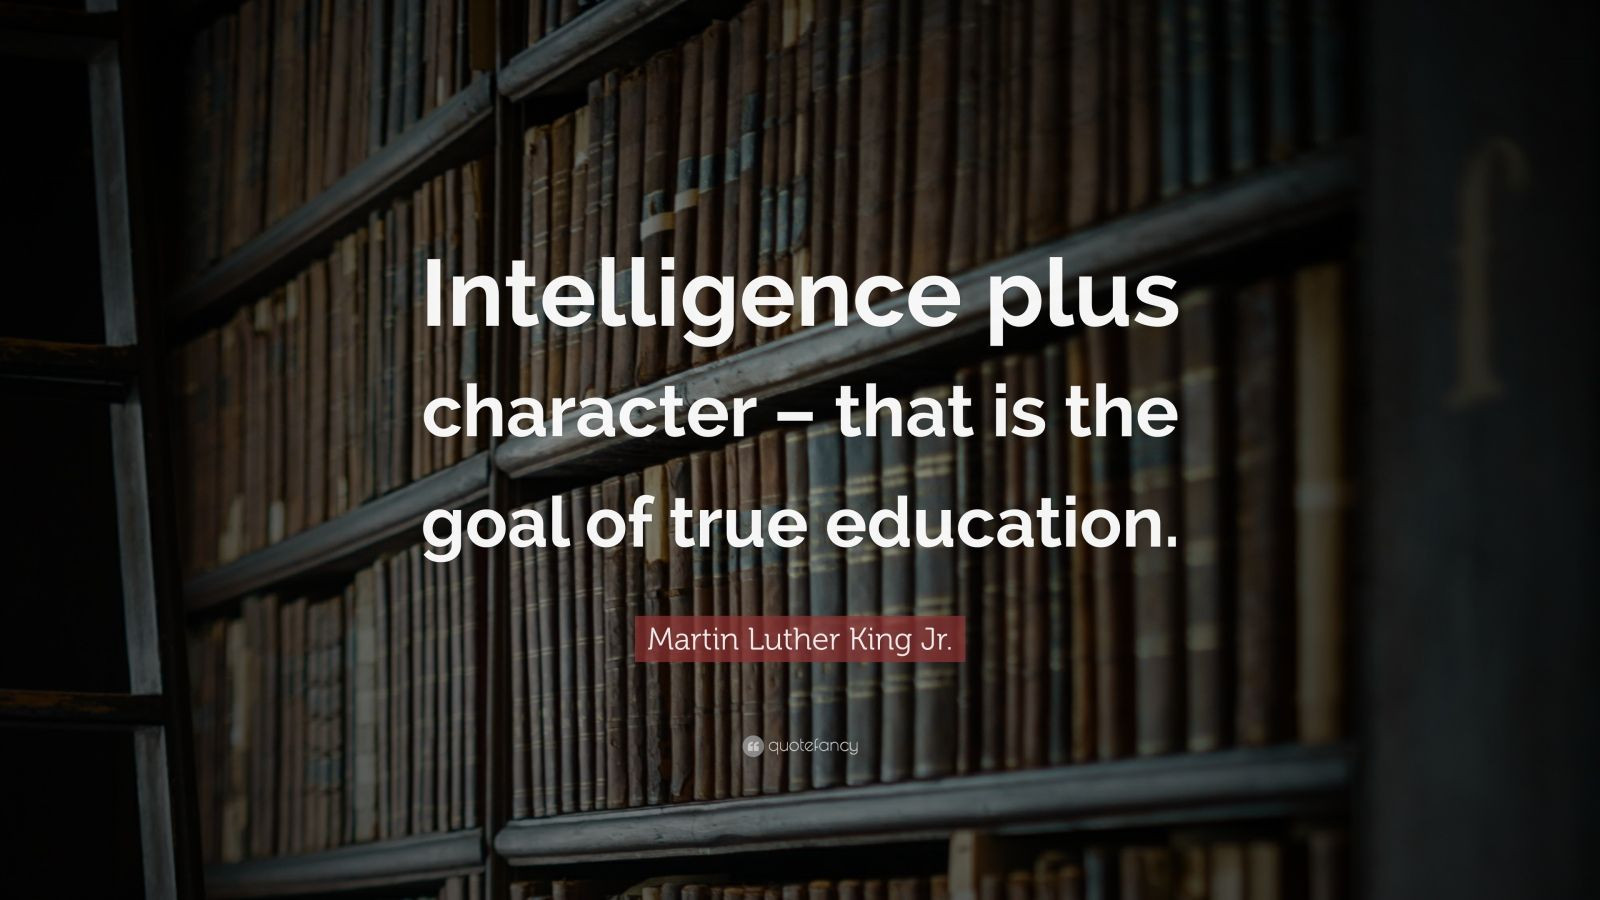 Martin Luther Quotes On Education
 Martin Luther King Jr Quote “Intelligence plus character